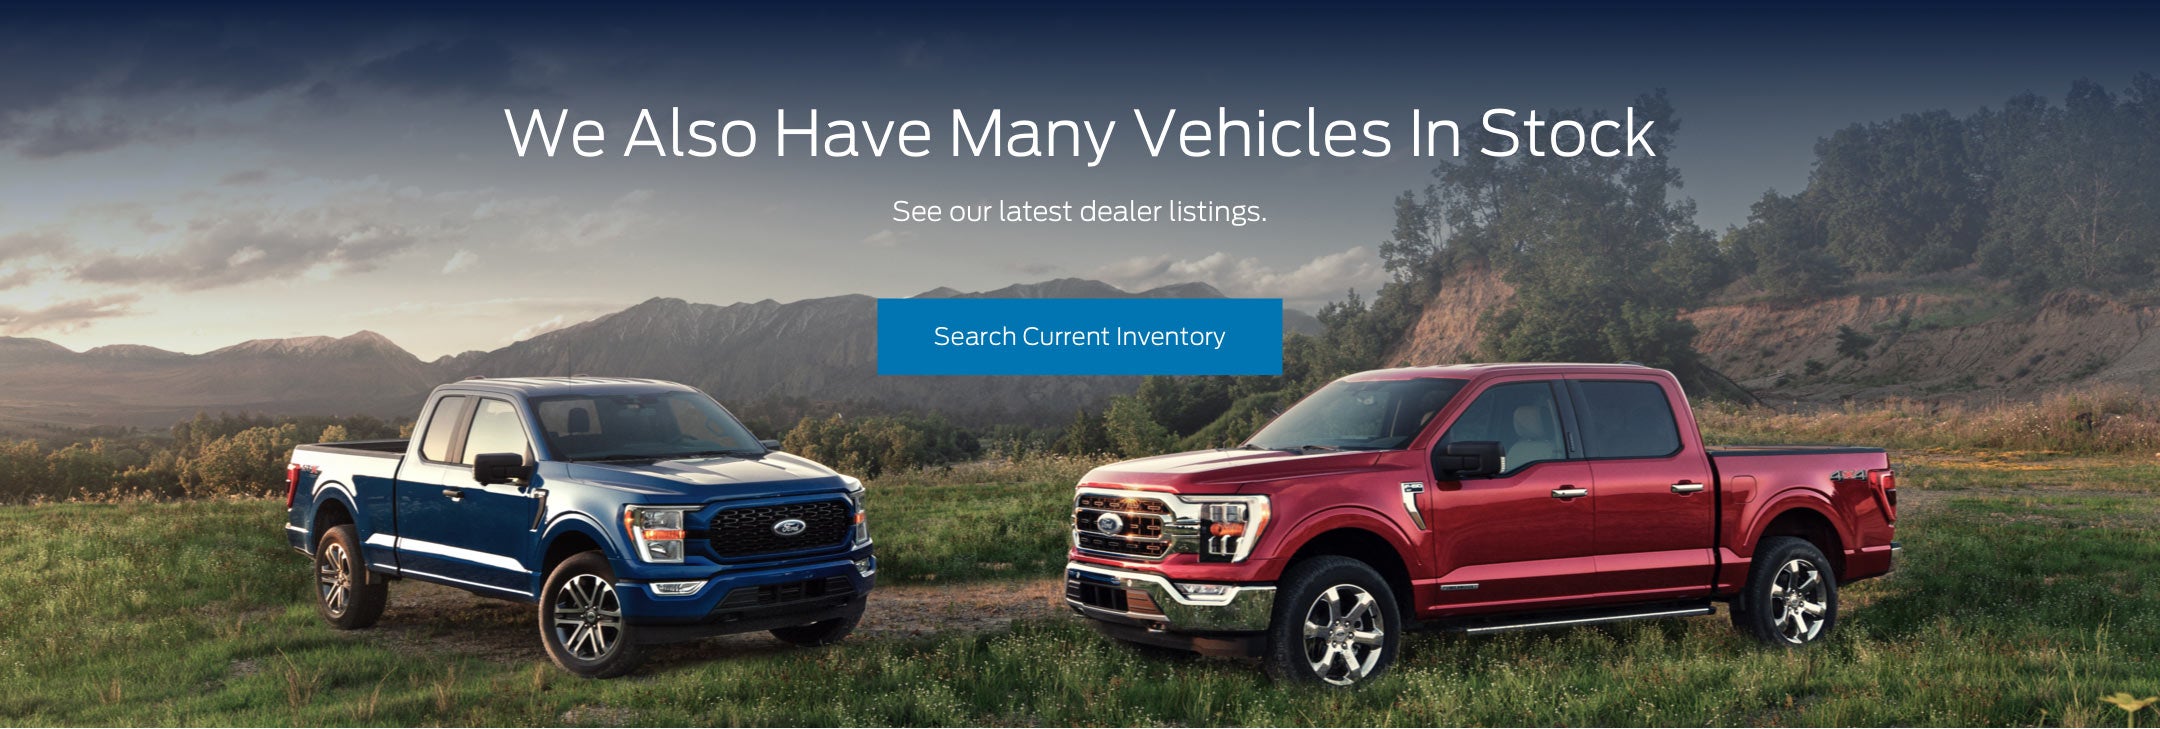 Ford vehicles in stock | Foothill Ford in Pilot Mountain NC